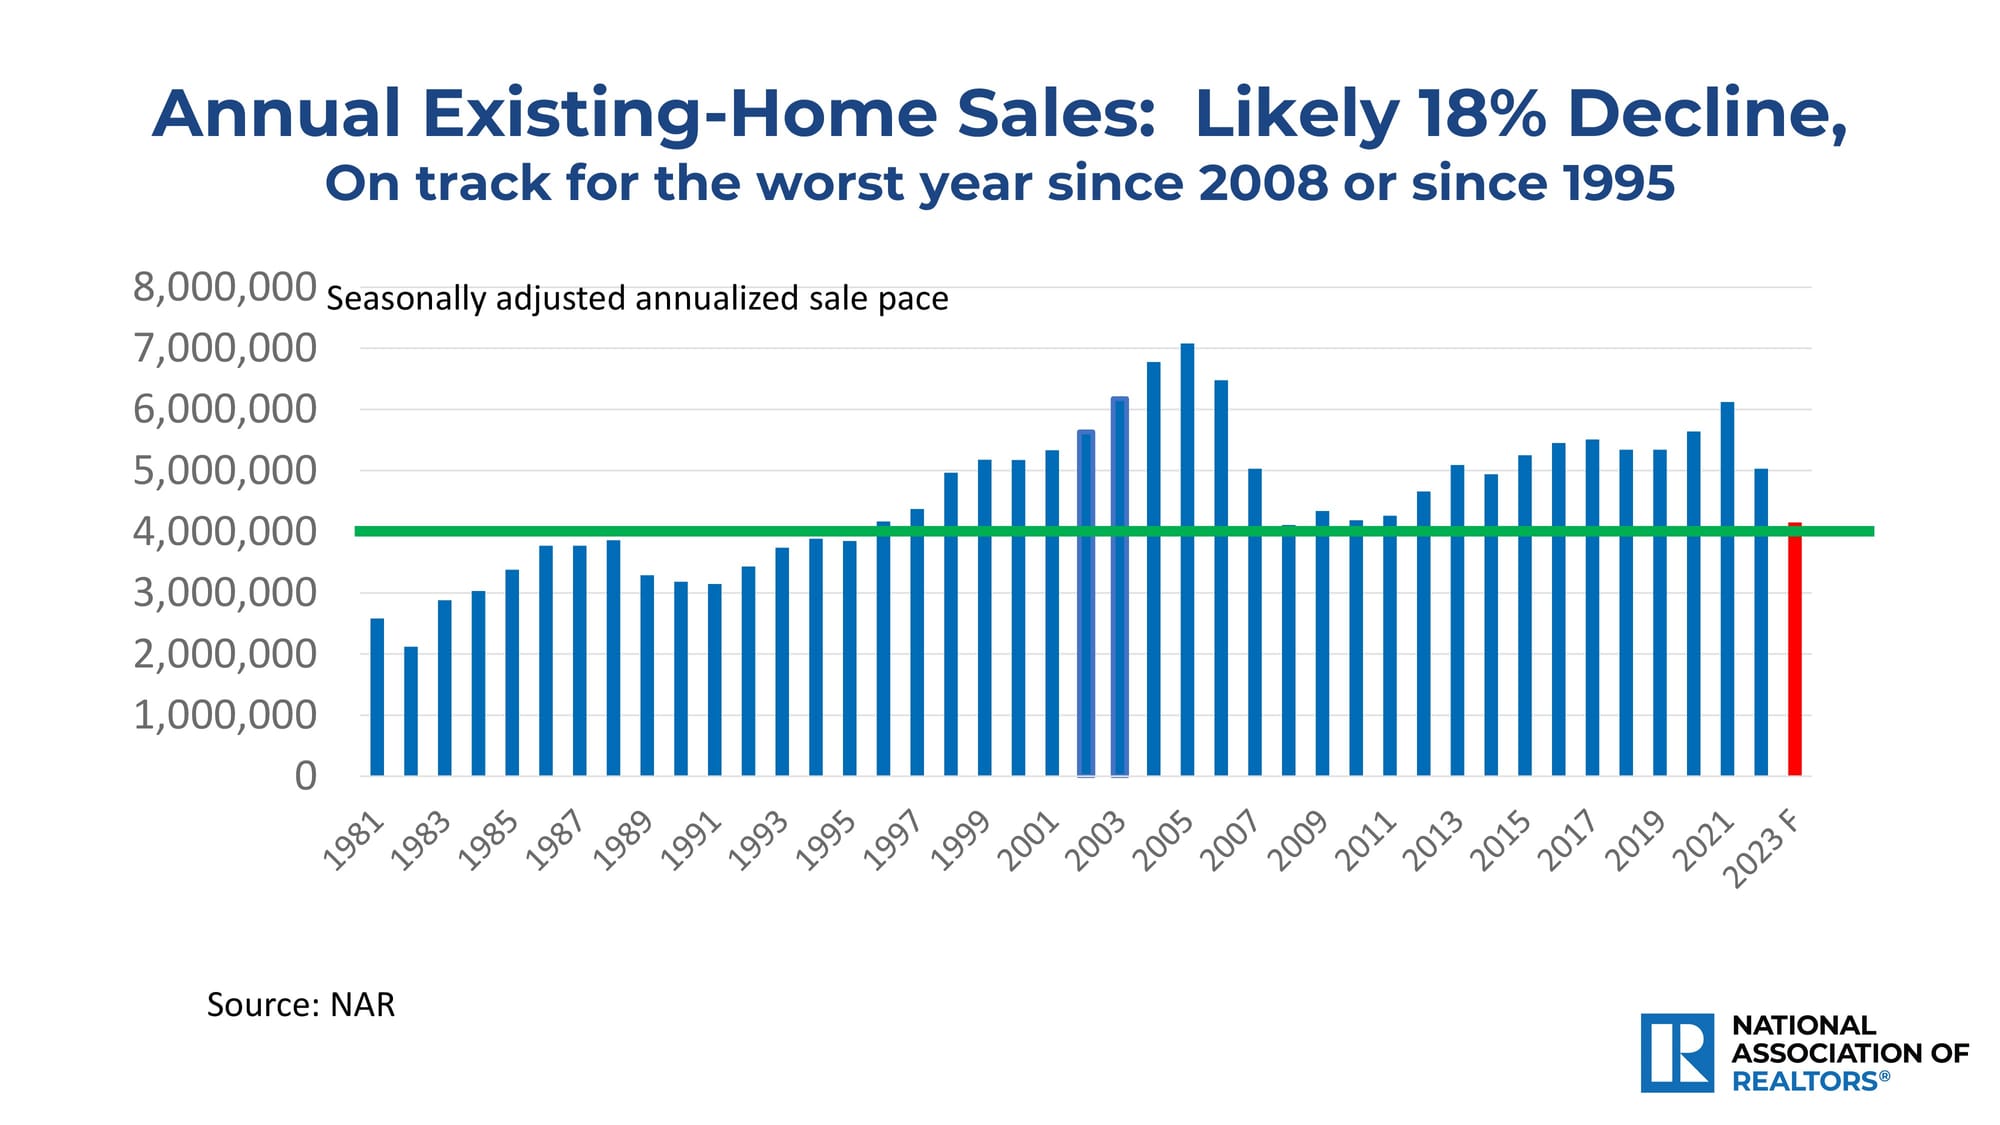 Annual Existing Home Sales: Likely 18% Decline, According to NAR